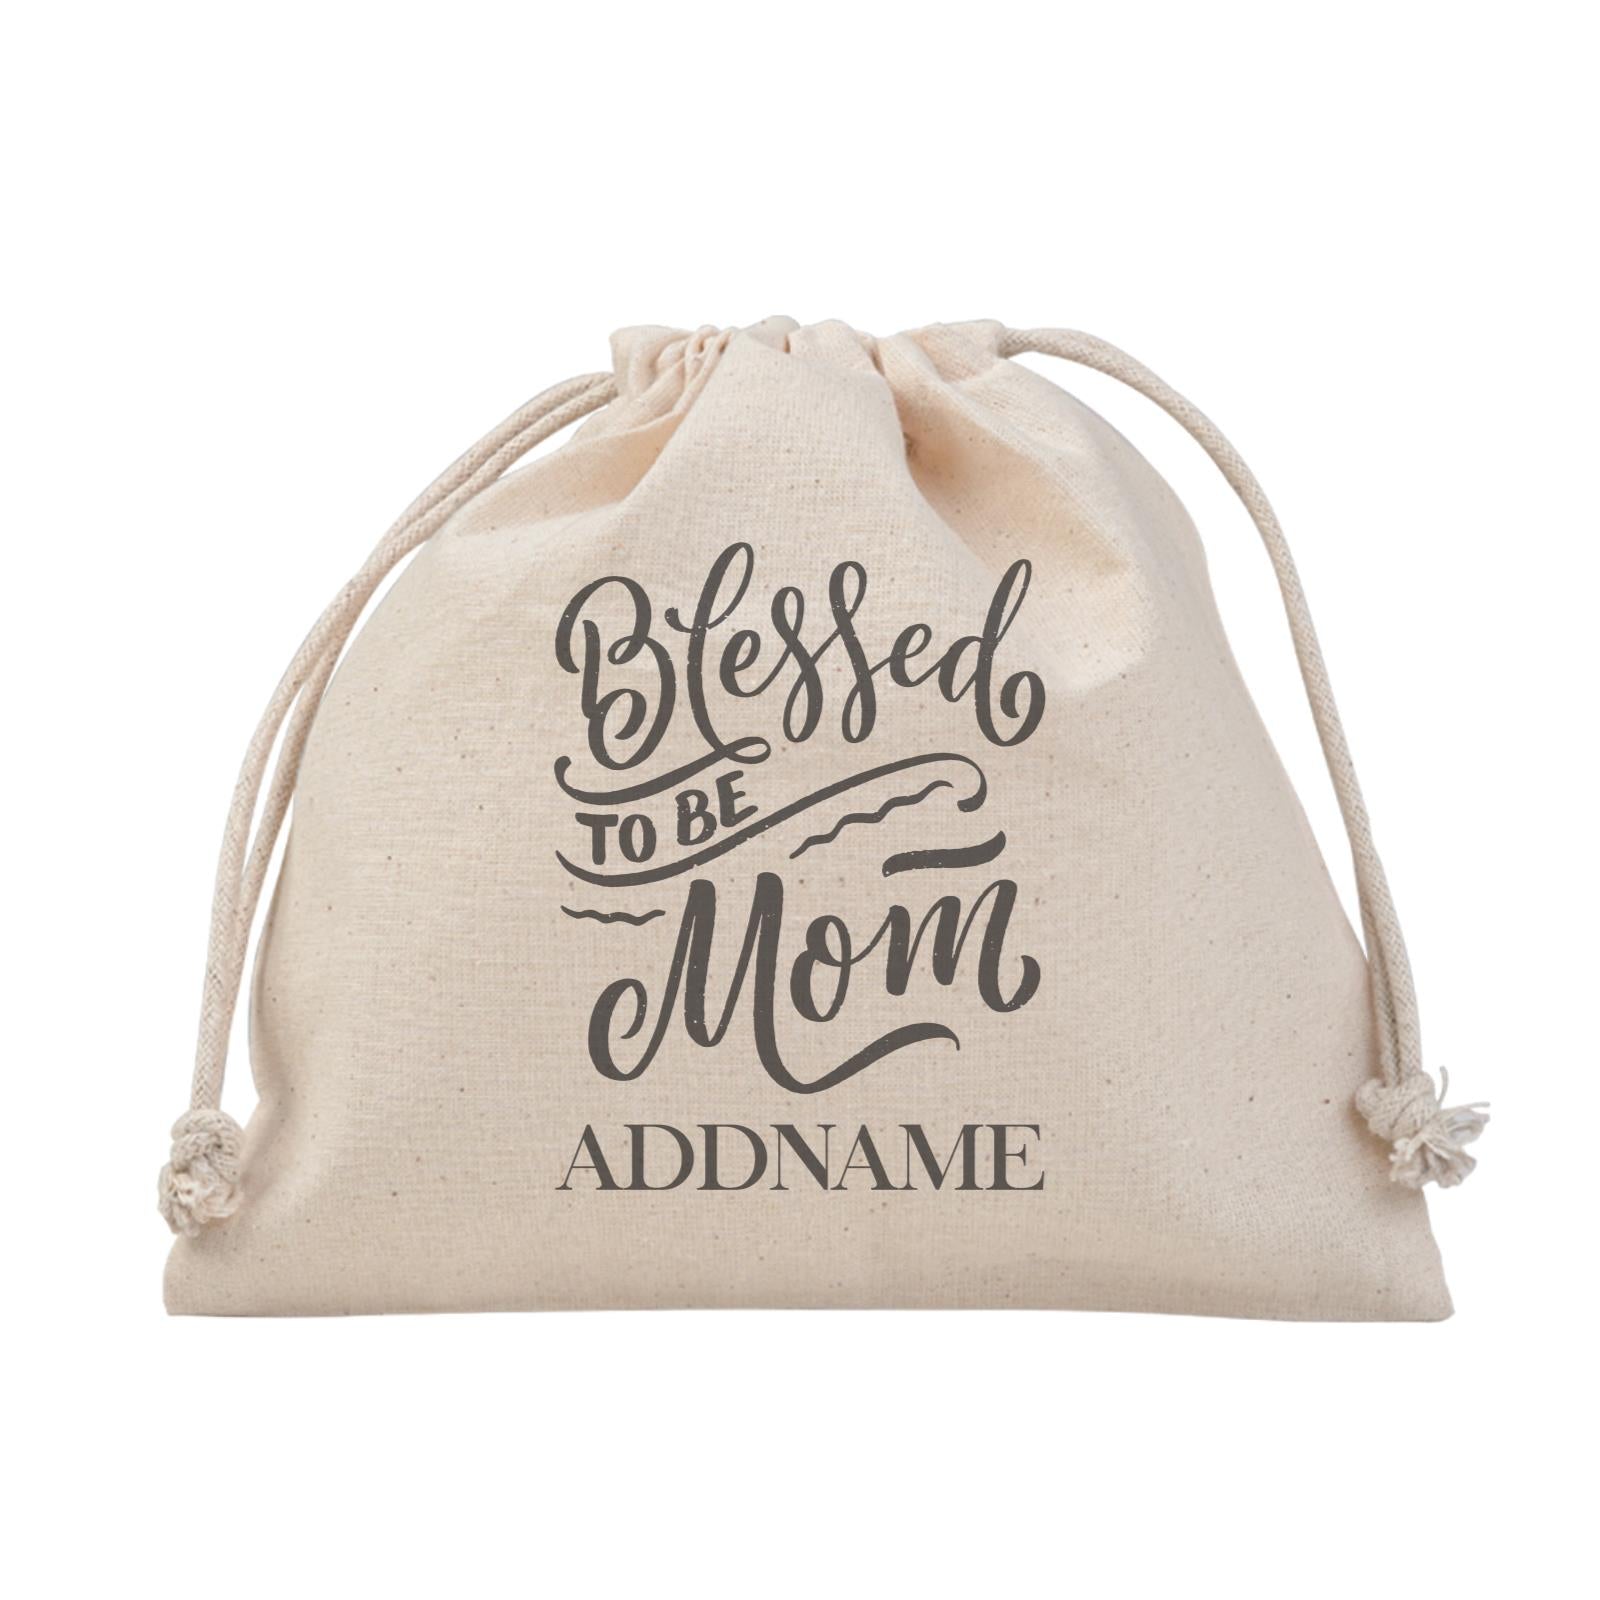 [MOTHER'S DAY 2021] Blessed To Be Mom Satchel